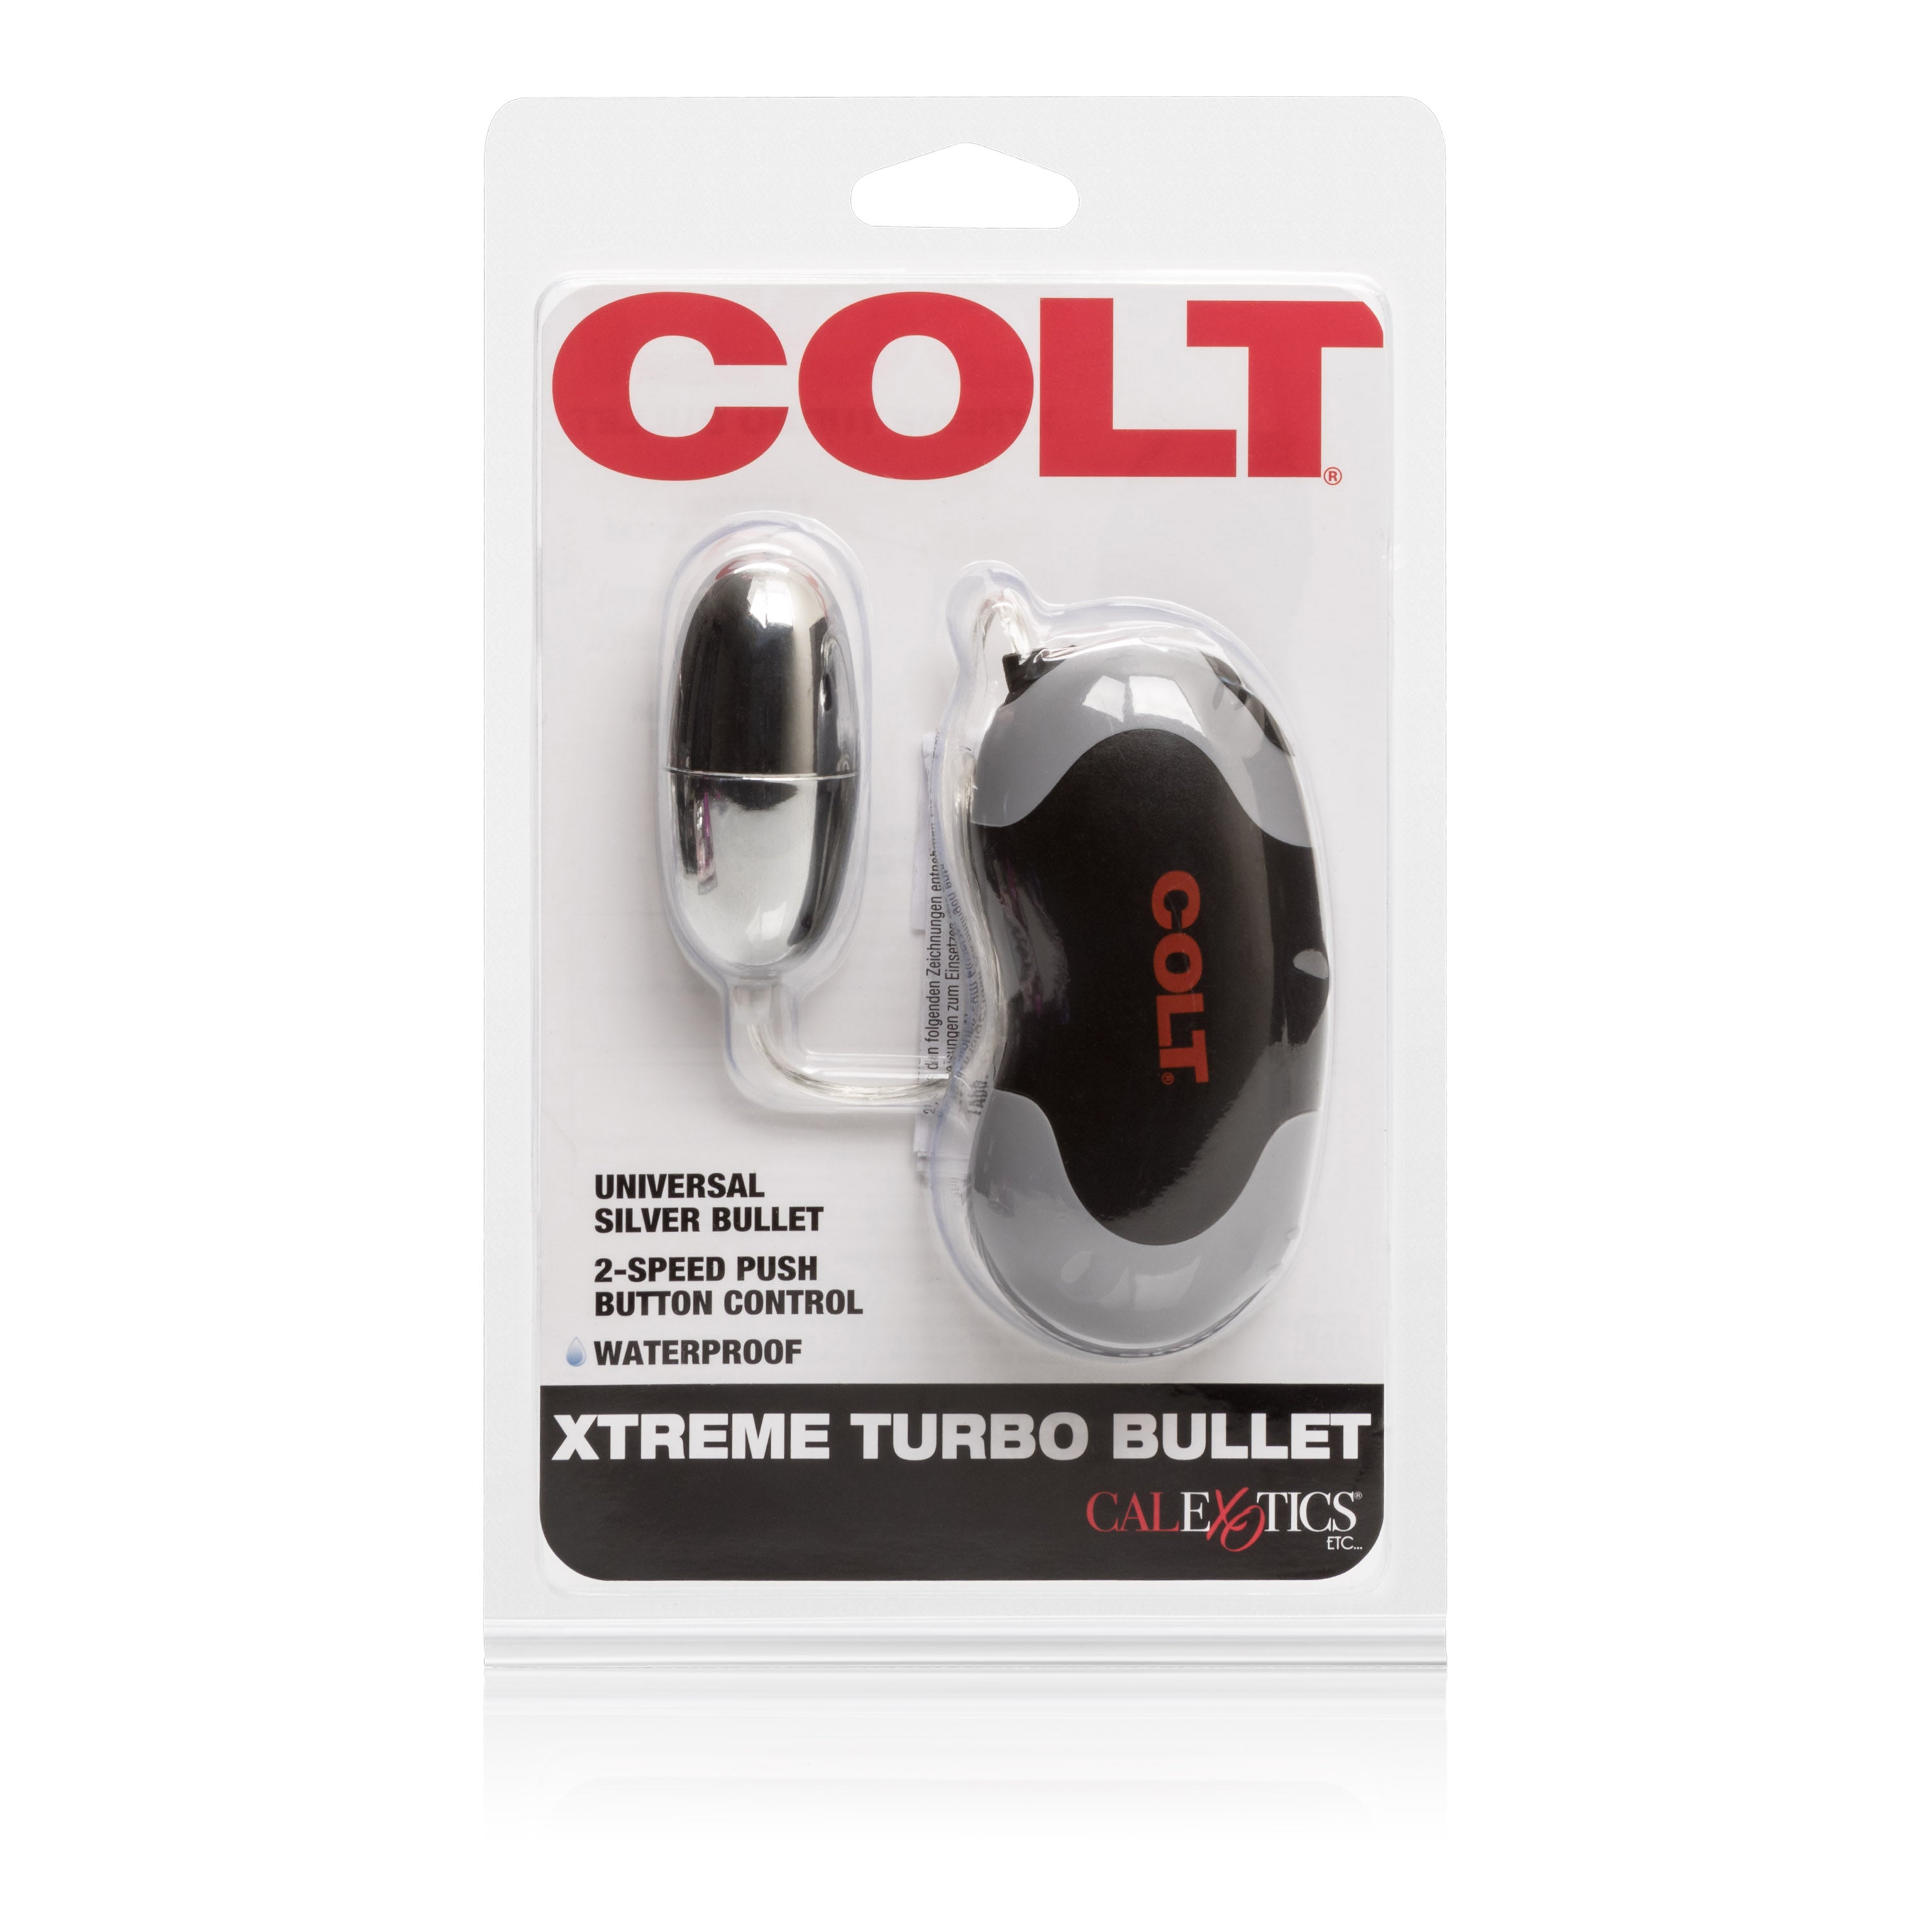 Colt Xtreme Turbo Bullet: Powerful Pleasure in a Compact Package